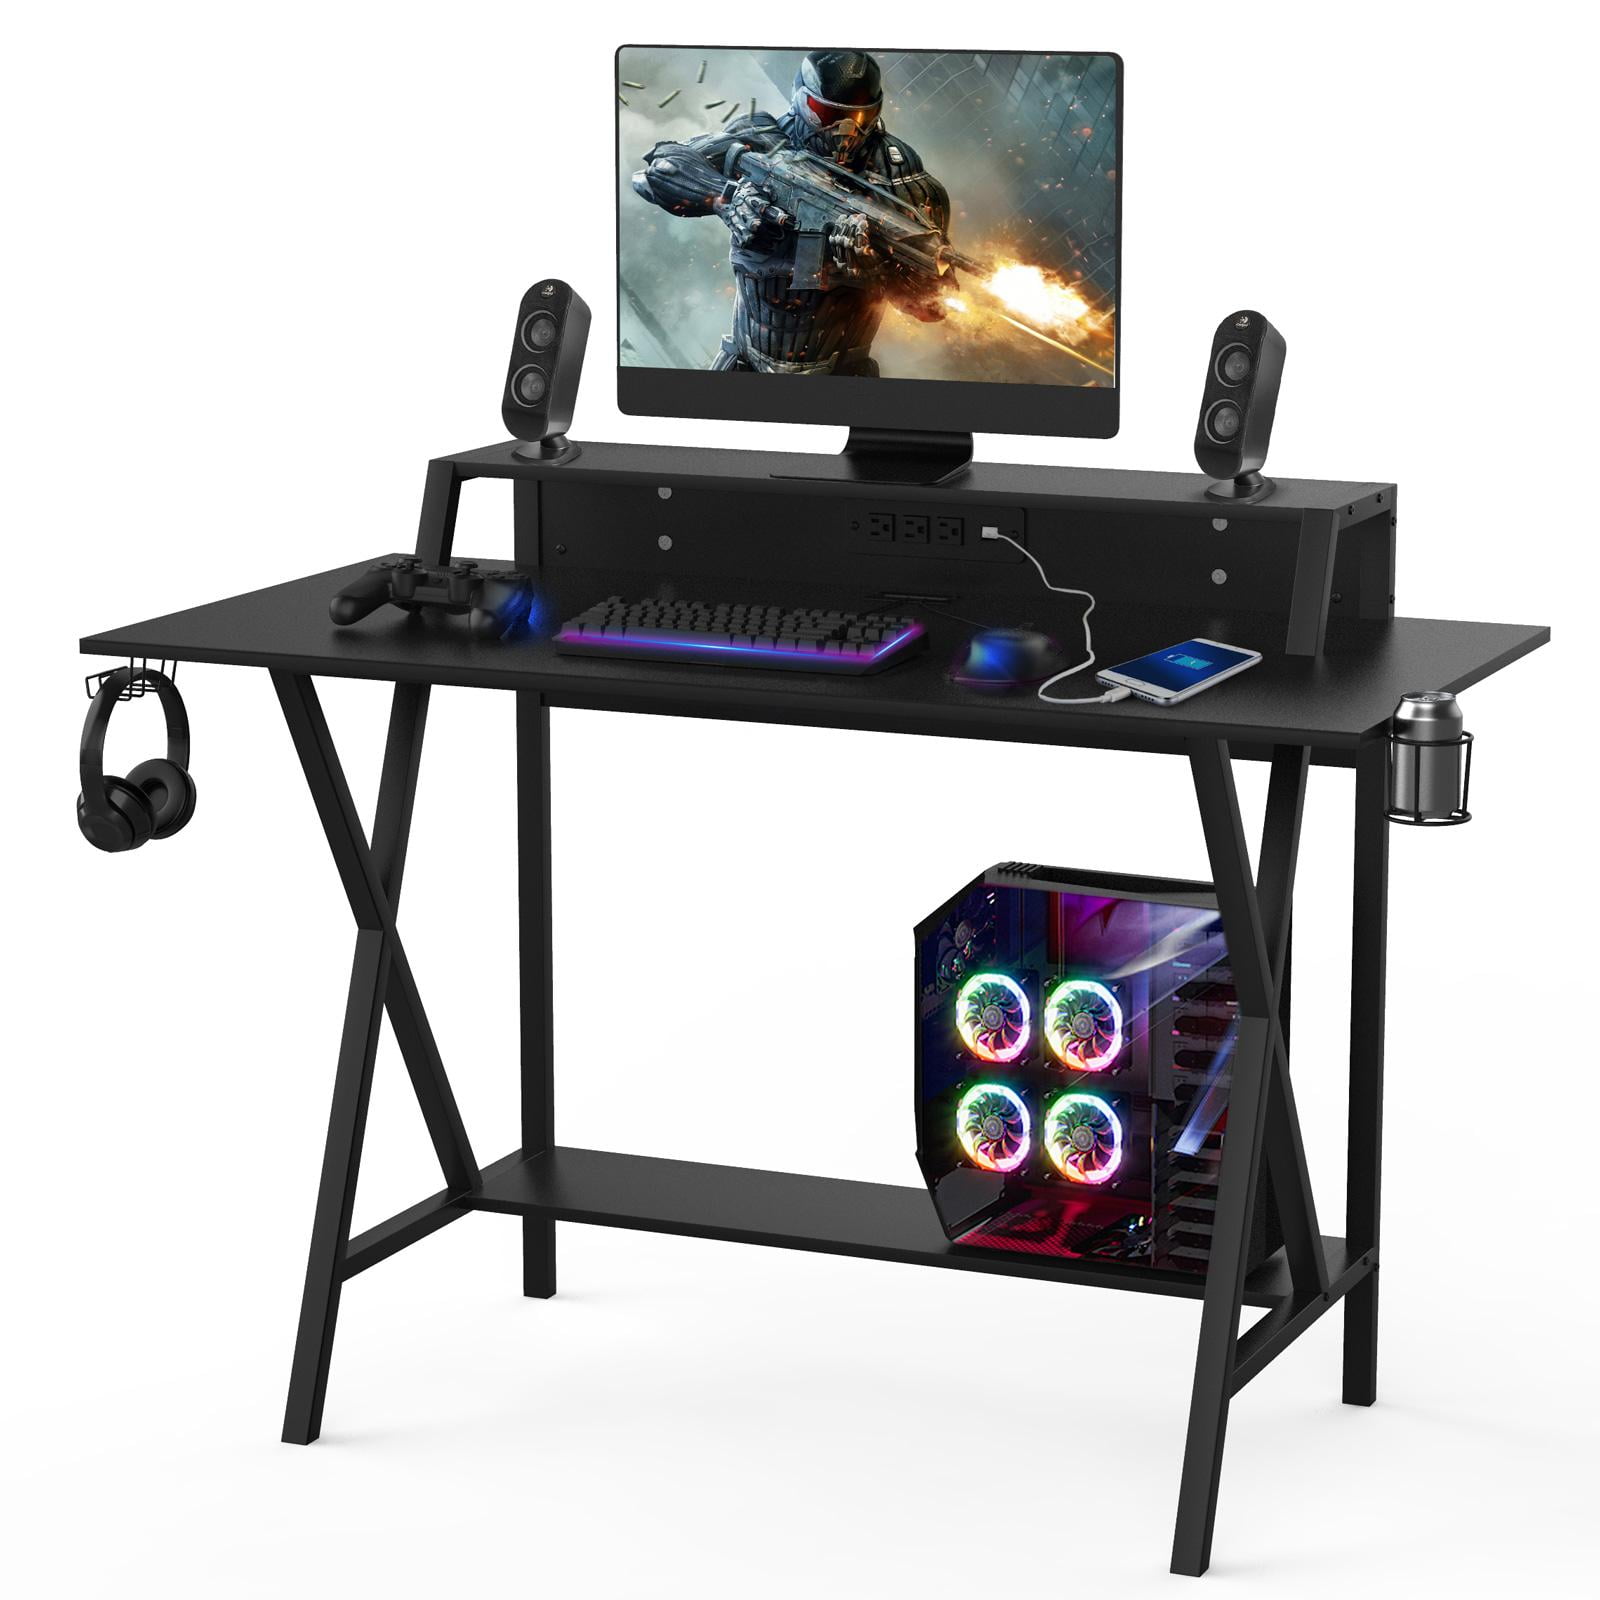 Maplin Large Gaming Desk with Cup Holder, Headphone Hook & Cable